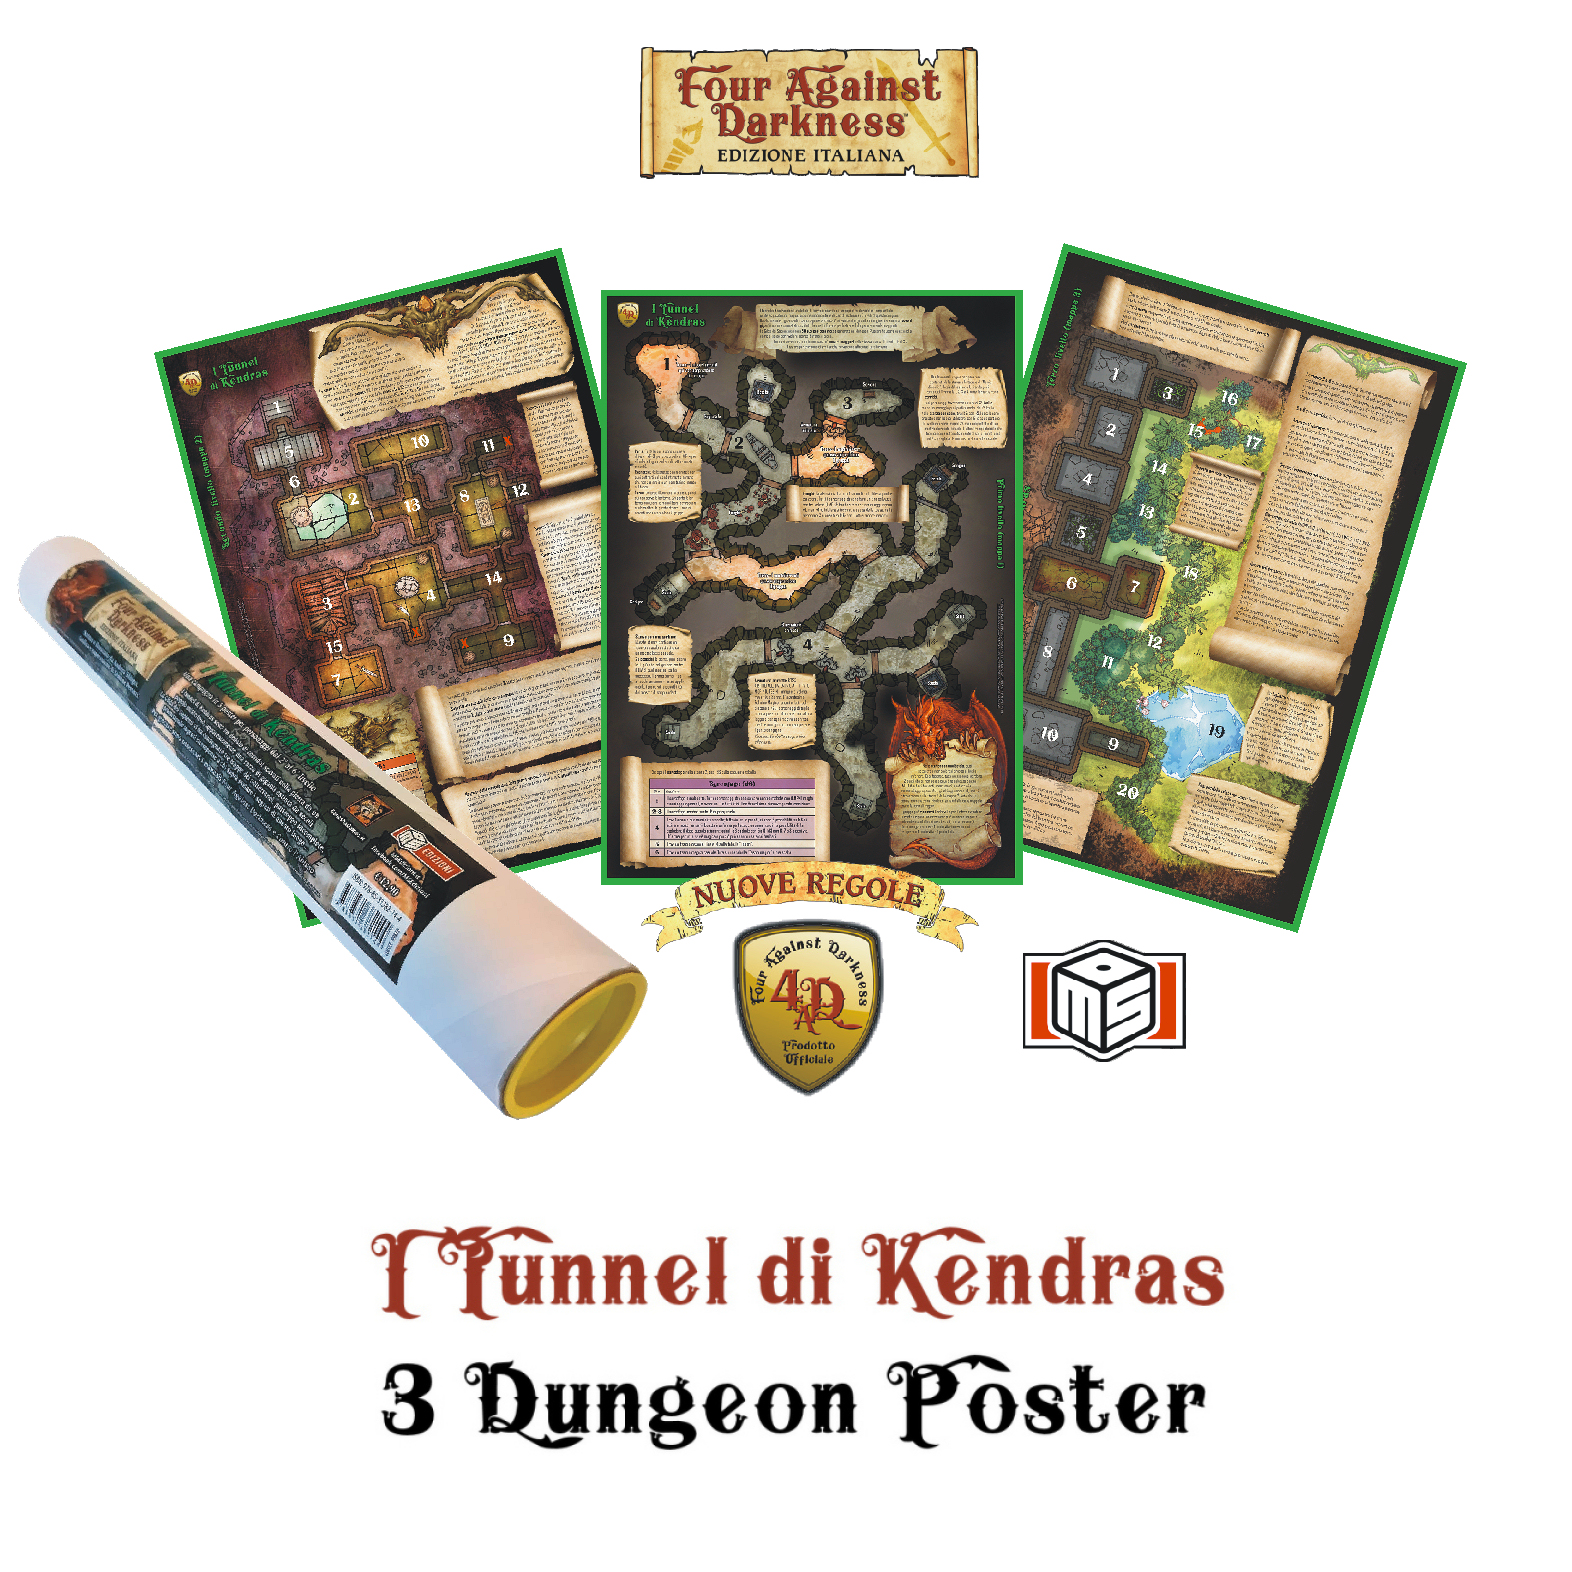 FOUR AGAINST DARKNESS: I TUNNEL DI KENDRAS - 3 DUNGEON POSTER